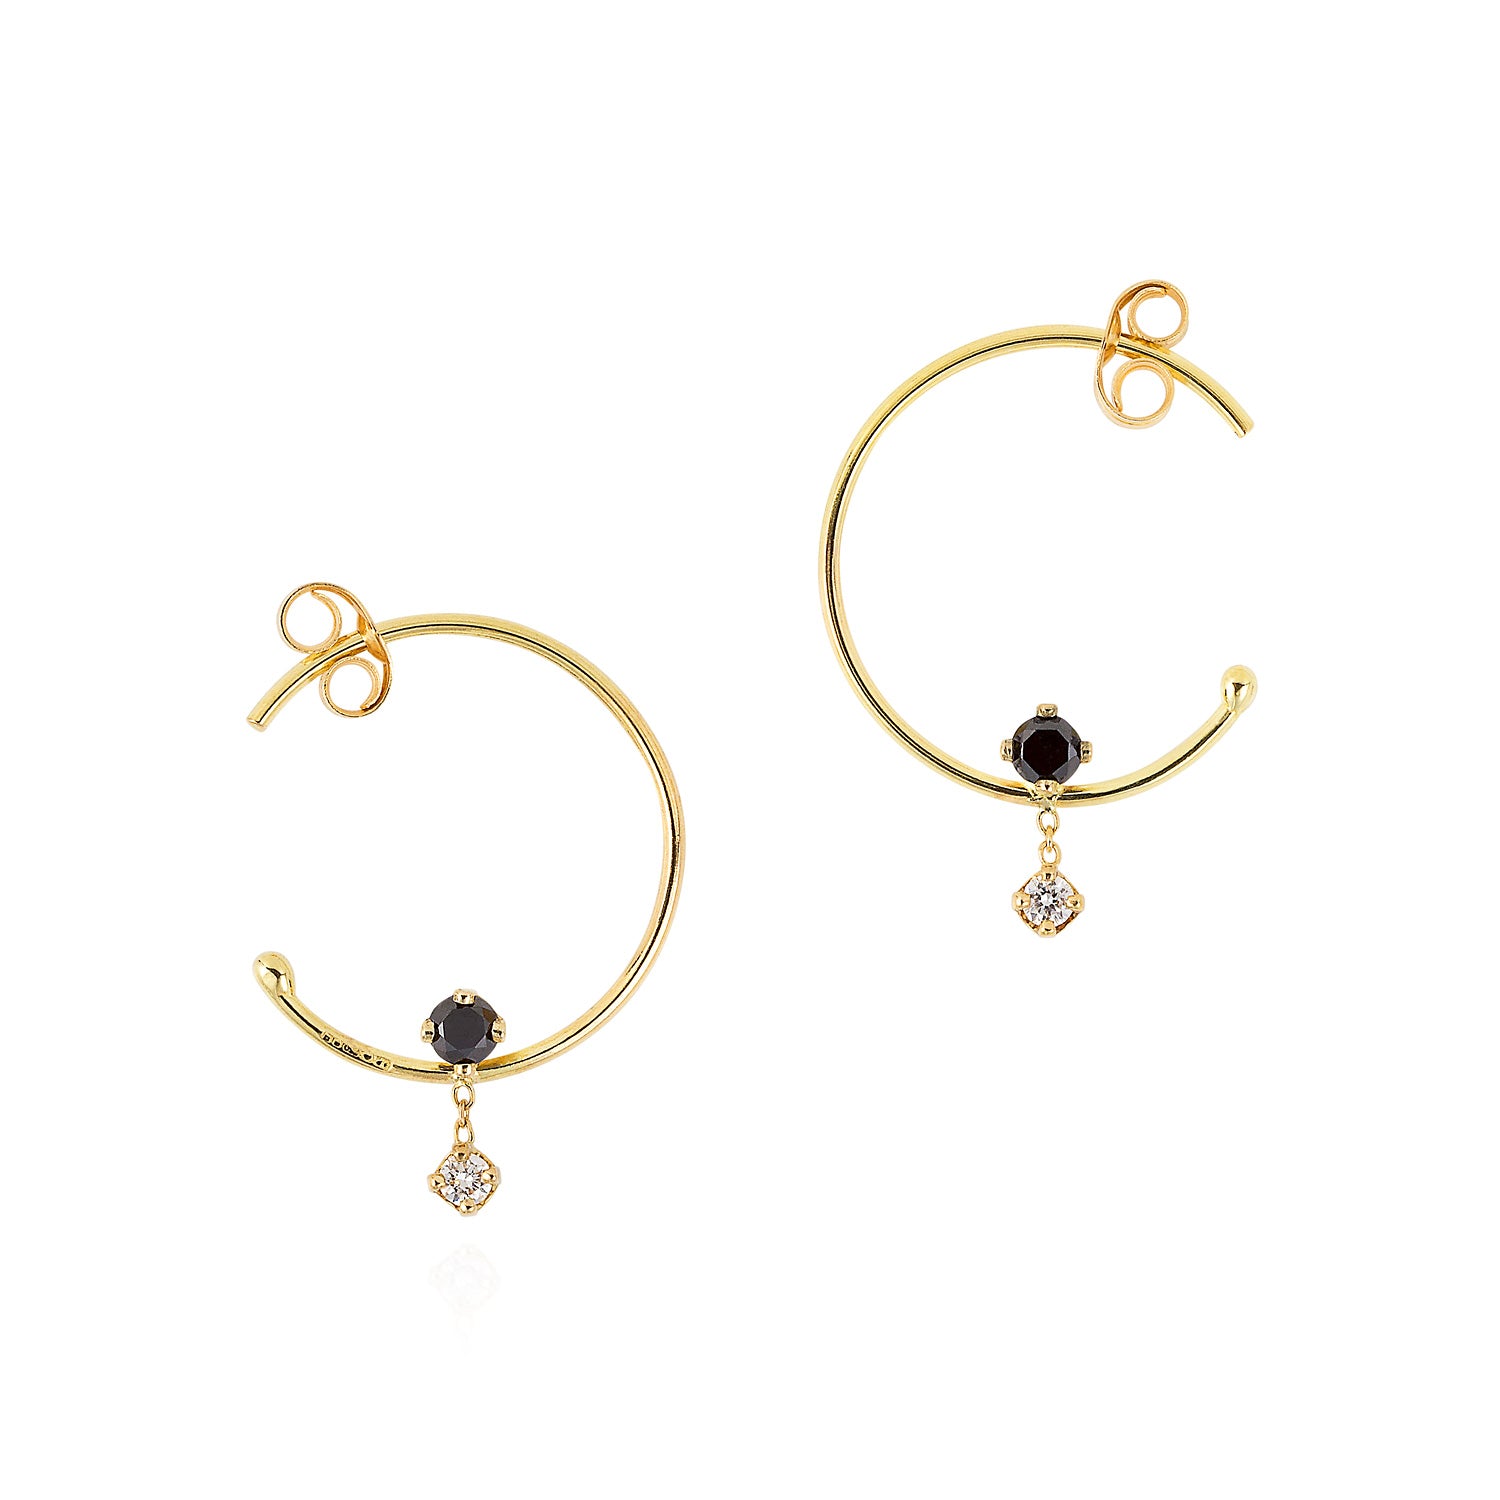 18ct yellow gold hoops with Black and White Diamond